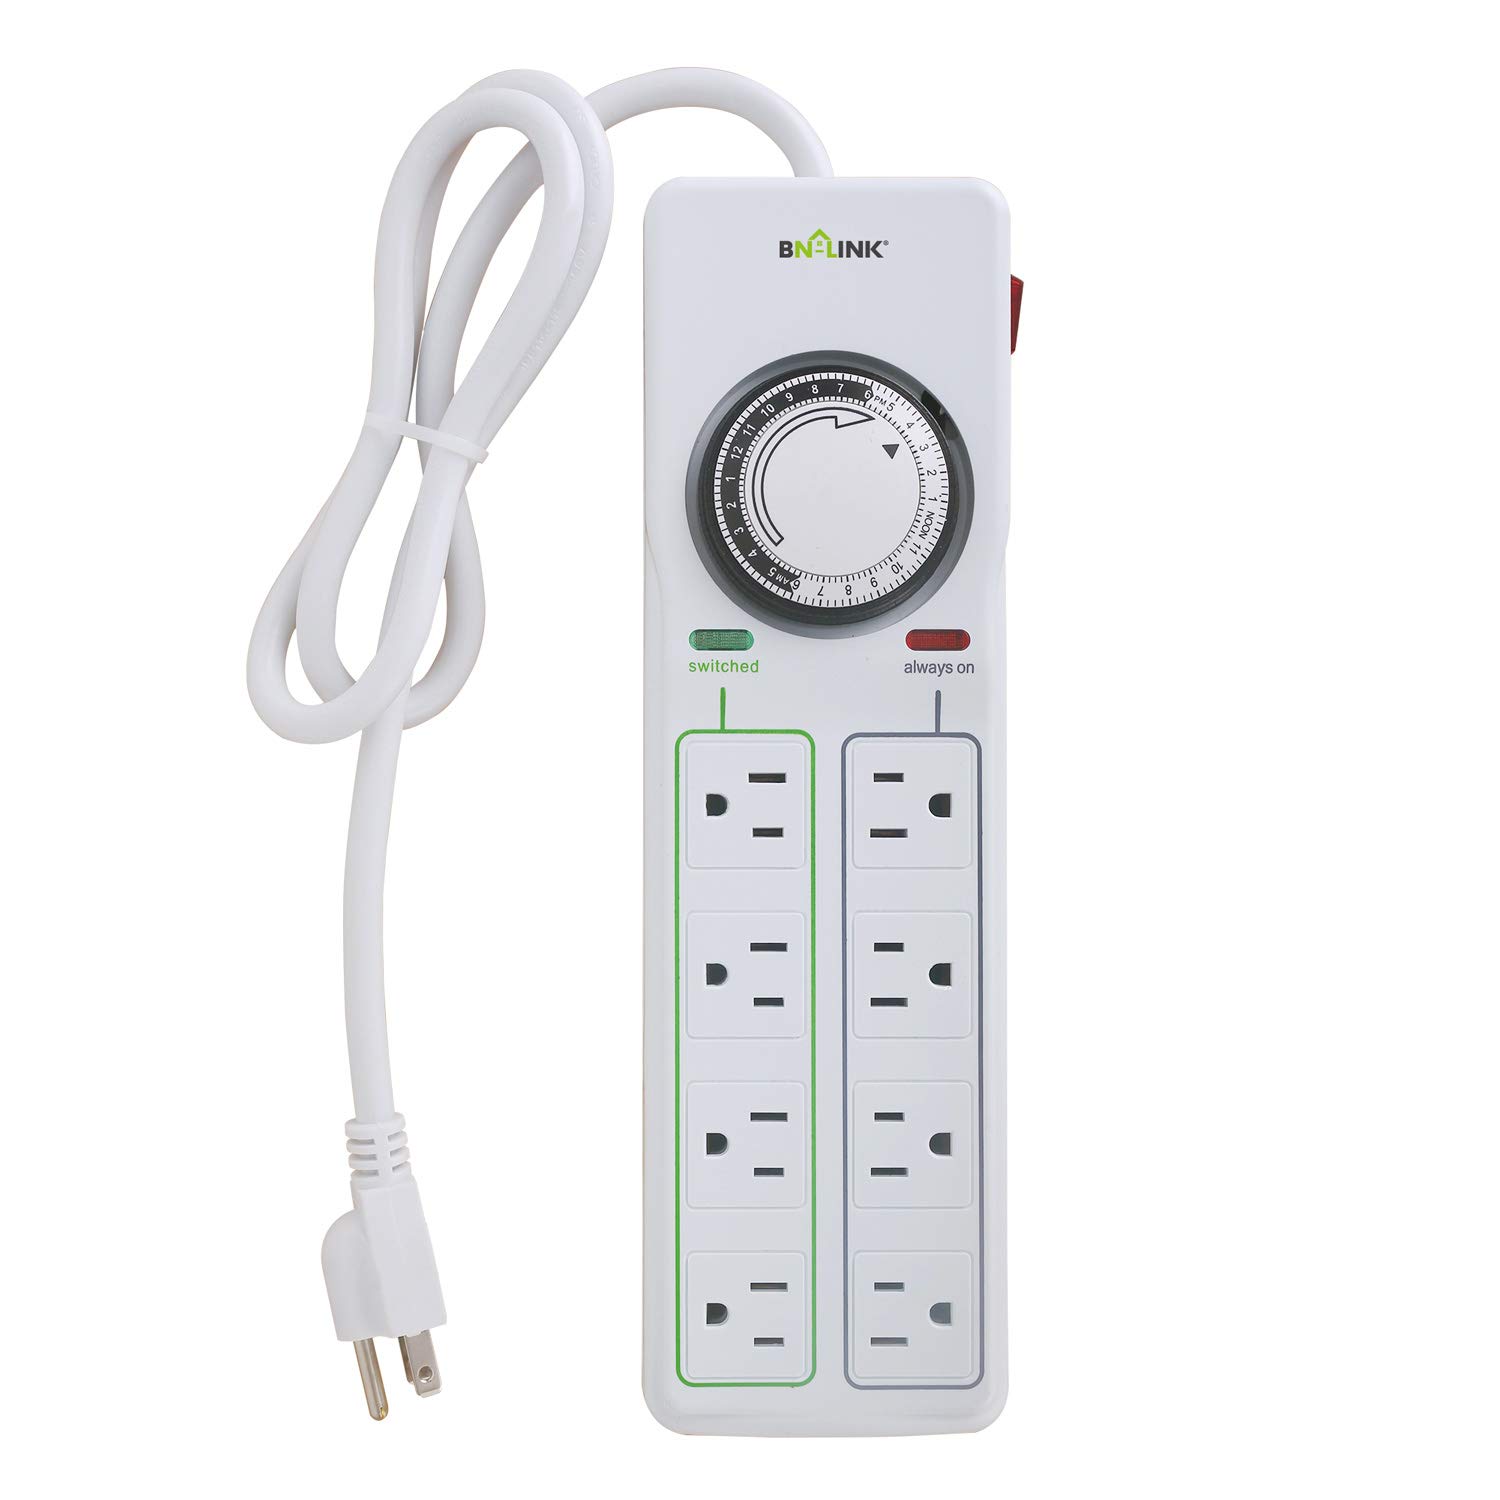 BN-LINK 8 Outlet Surge Protector with Mechanical Timer (4 Outlets Timed, 4 Outlets Always On),6.6FT Extension Cord Flat Plug, White Surge Protector Power Strip with 6AC Outlets 4 USB Ports